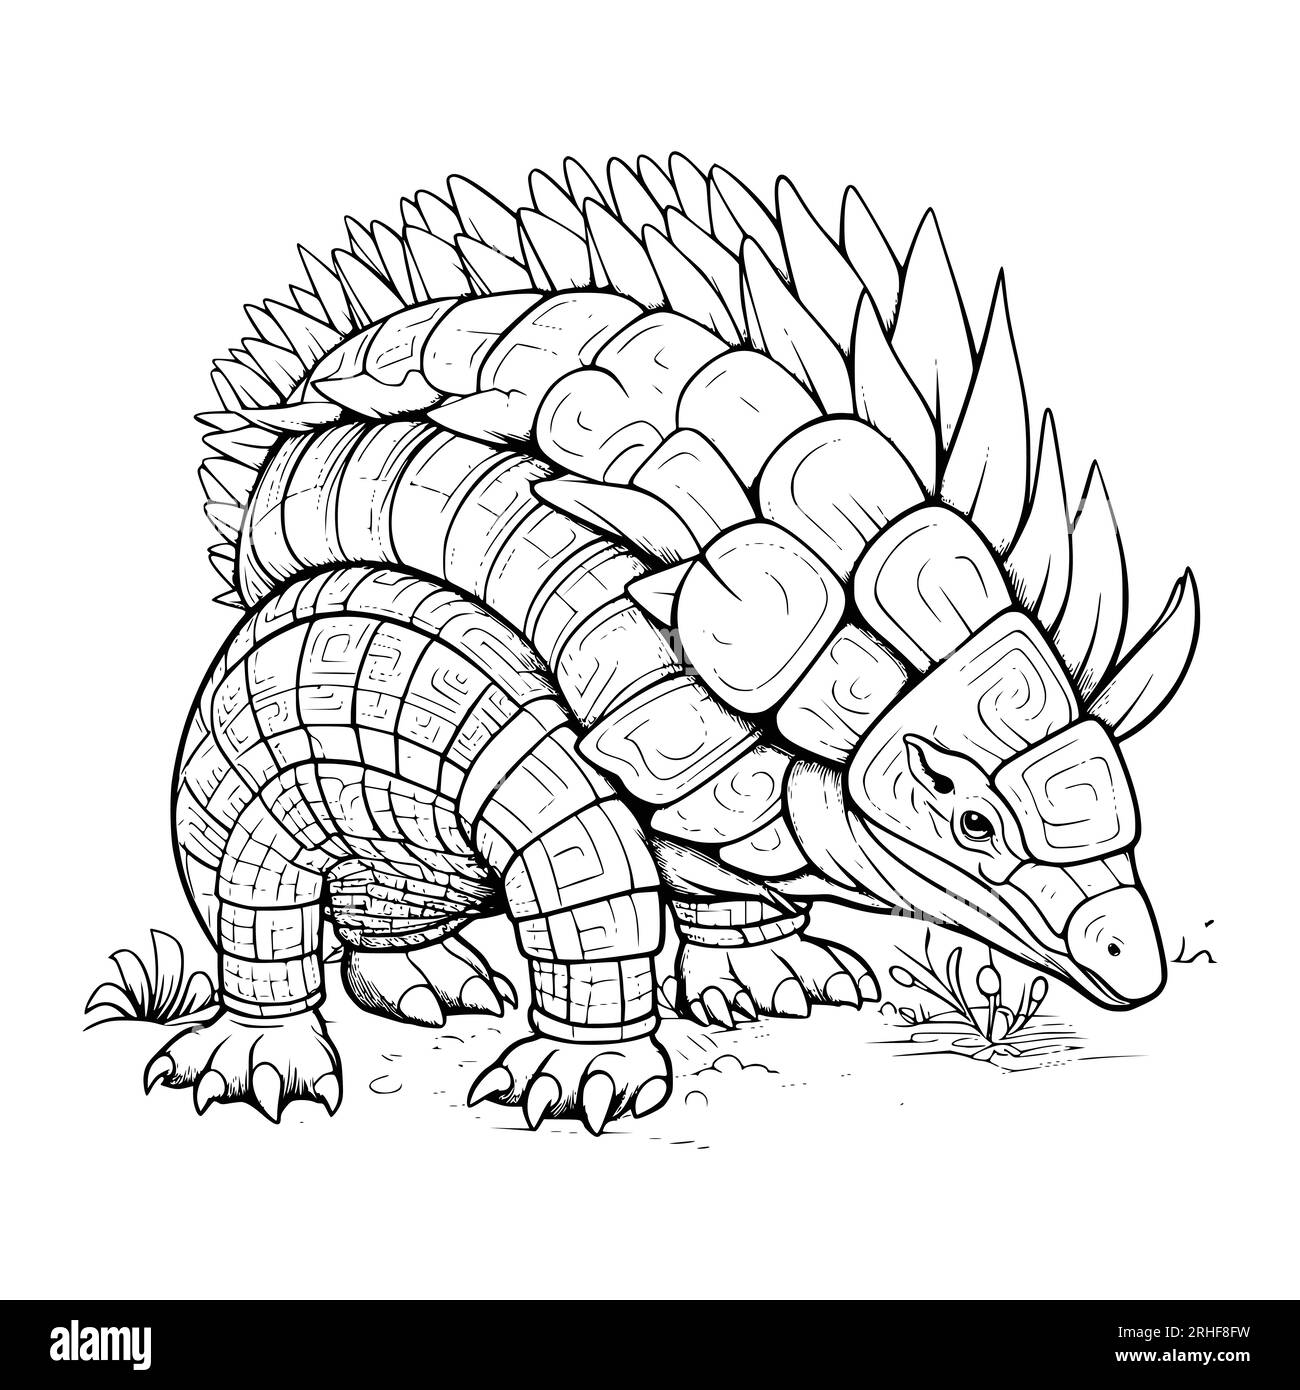 Armadillo Coloring Page For Kids Stock Vector